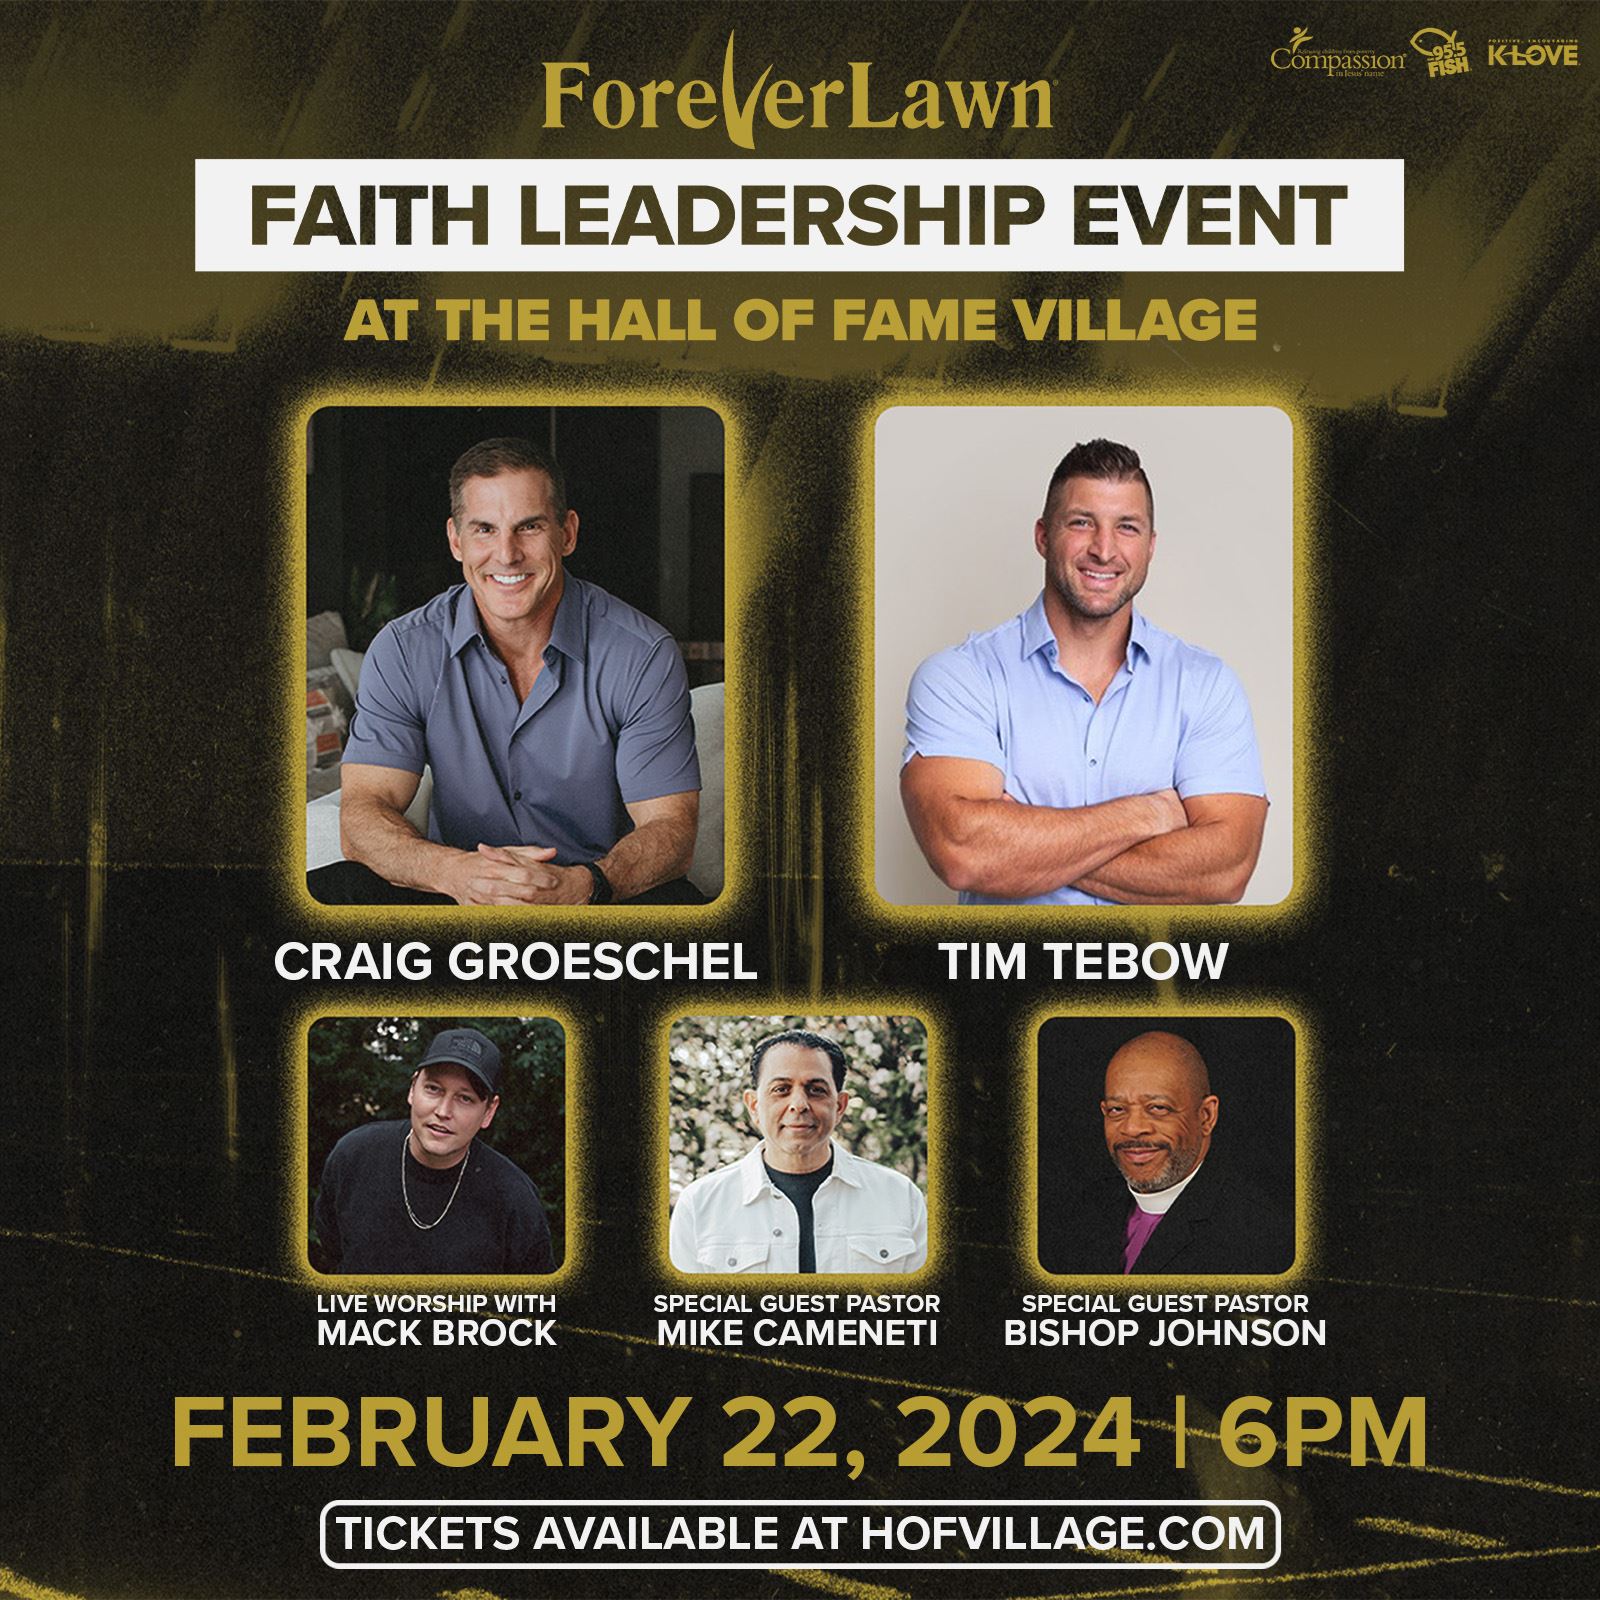 Hall Of Fame Village To Host ForeverLawn Faith Leadership Event Featuring Craig Groeschel And Tim Tebow On February 22